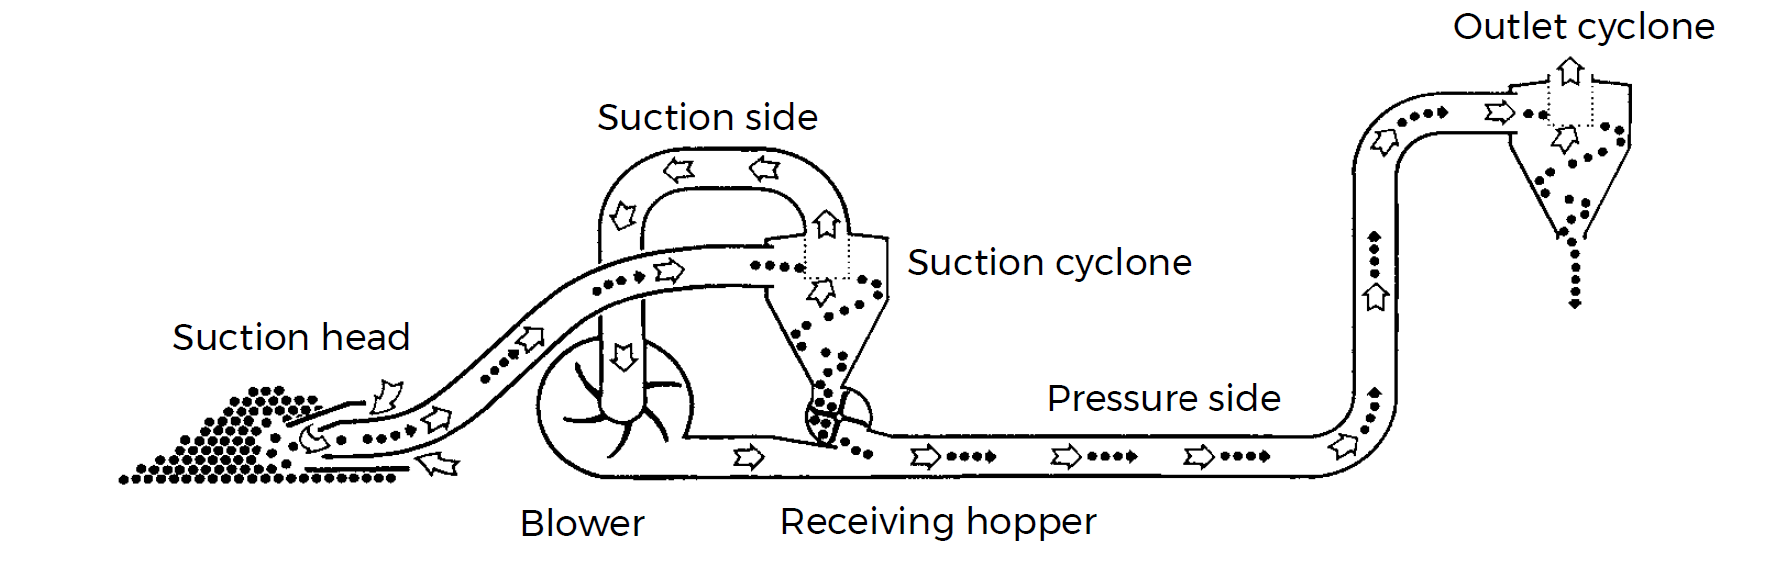 Suction Blower Example